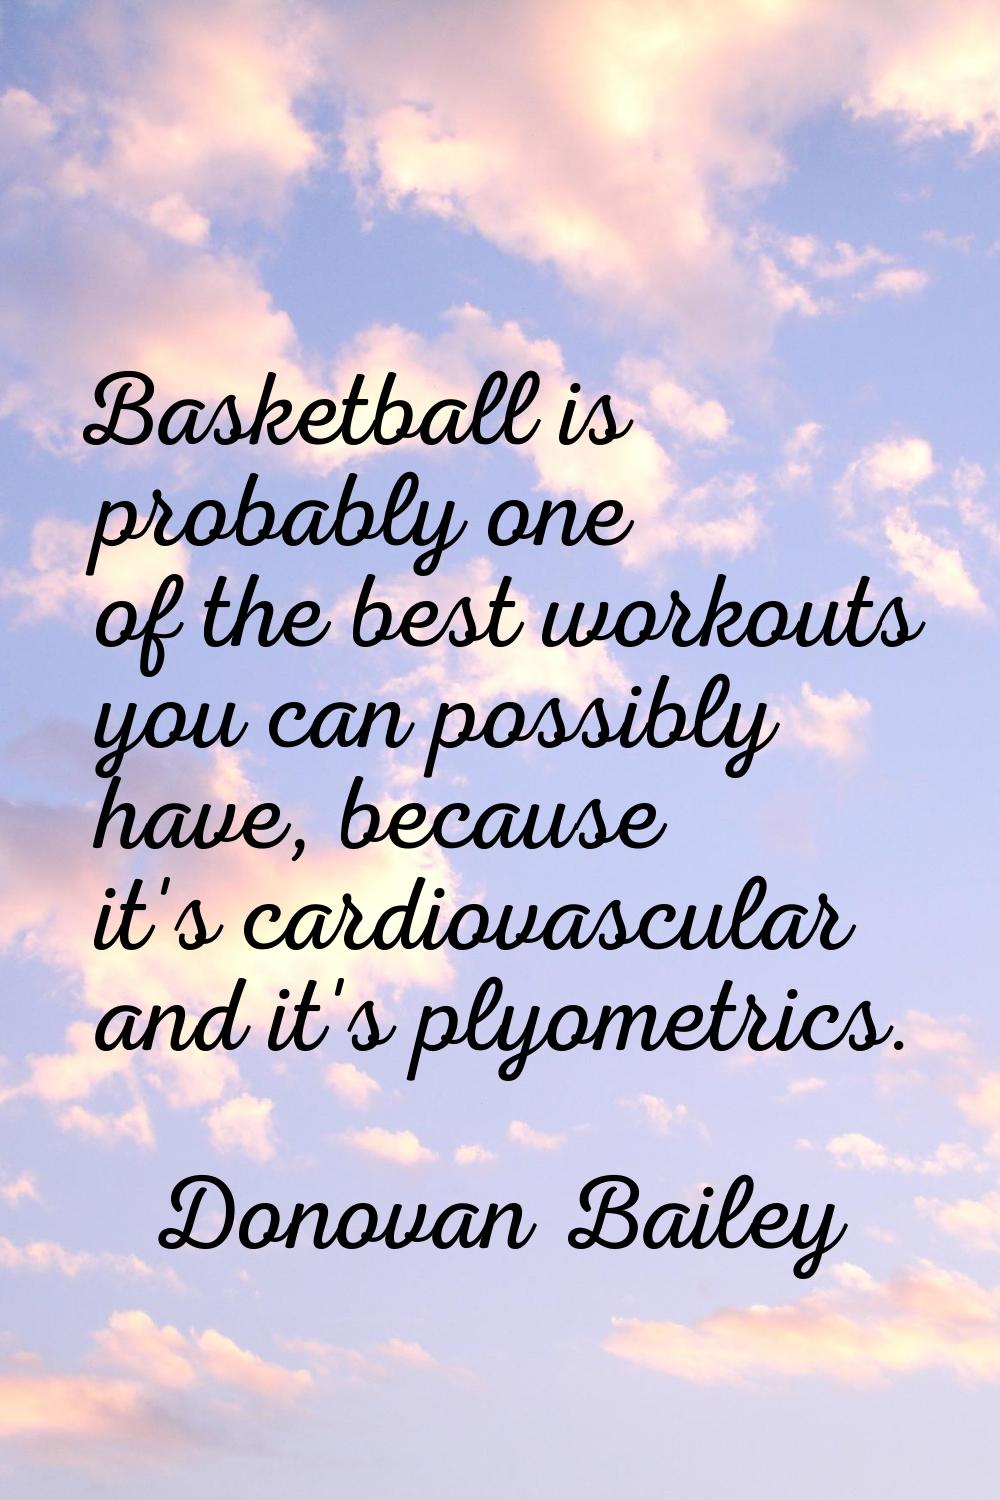 Basketball is probably one of the best workouts you can possibly have, because it's cardiovascular 